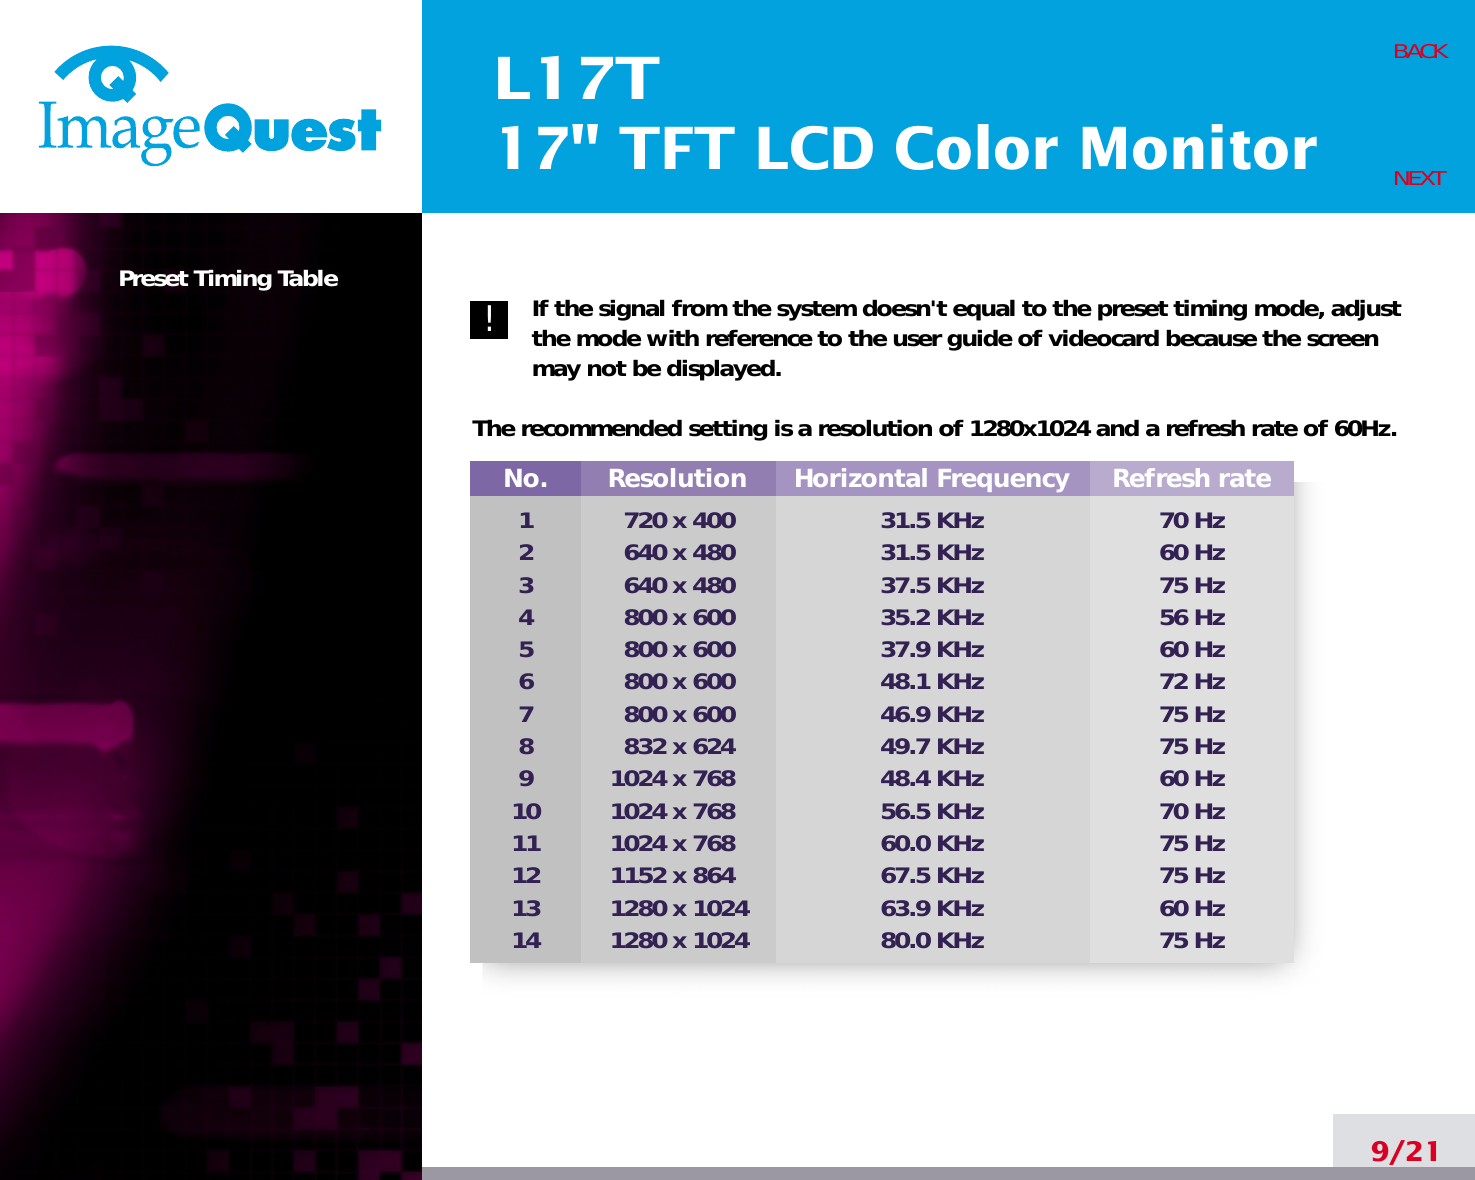 L17T17&quot; TFT LCD Color MonitorPreset Timing Table If the signal from the system doesn&apos;t equal to the preset timing mode, adjustthe mode with reference to the user guide of videocard because the screenmay not be displayed.The recommended setting is a resolution of 1280x1024 and a refresh rate of 60Hz.9/21BACKNEXT!No.1234567891011121314Resolution720 x 400640 x 480640 x 480 800 x 600800 x 600800 x 600800 x 600832 x 6241024 x 7681024 x 7681024 x 7681152 x 8641280 x 10241280 x 1024Horizontal Frequency31.5 KHz31.5 KHz37.5 KHz35.2 KHz37.9 KHz48.1 KHz46.9 KHz49.7 KHz48.4 KHz56.5 KHz60.0 KHz67.5 KHz63.9 KHz80.0 KHzRefresh rate70 Hz60 Hz75 Hz56 Hz60 Hz72 Hz75 Hz75 Hz60 Hz70 Hz75 Hz75 Hz60 Hz75 Hz